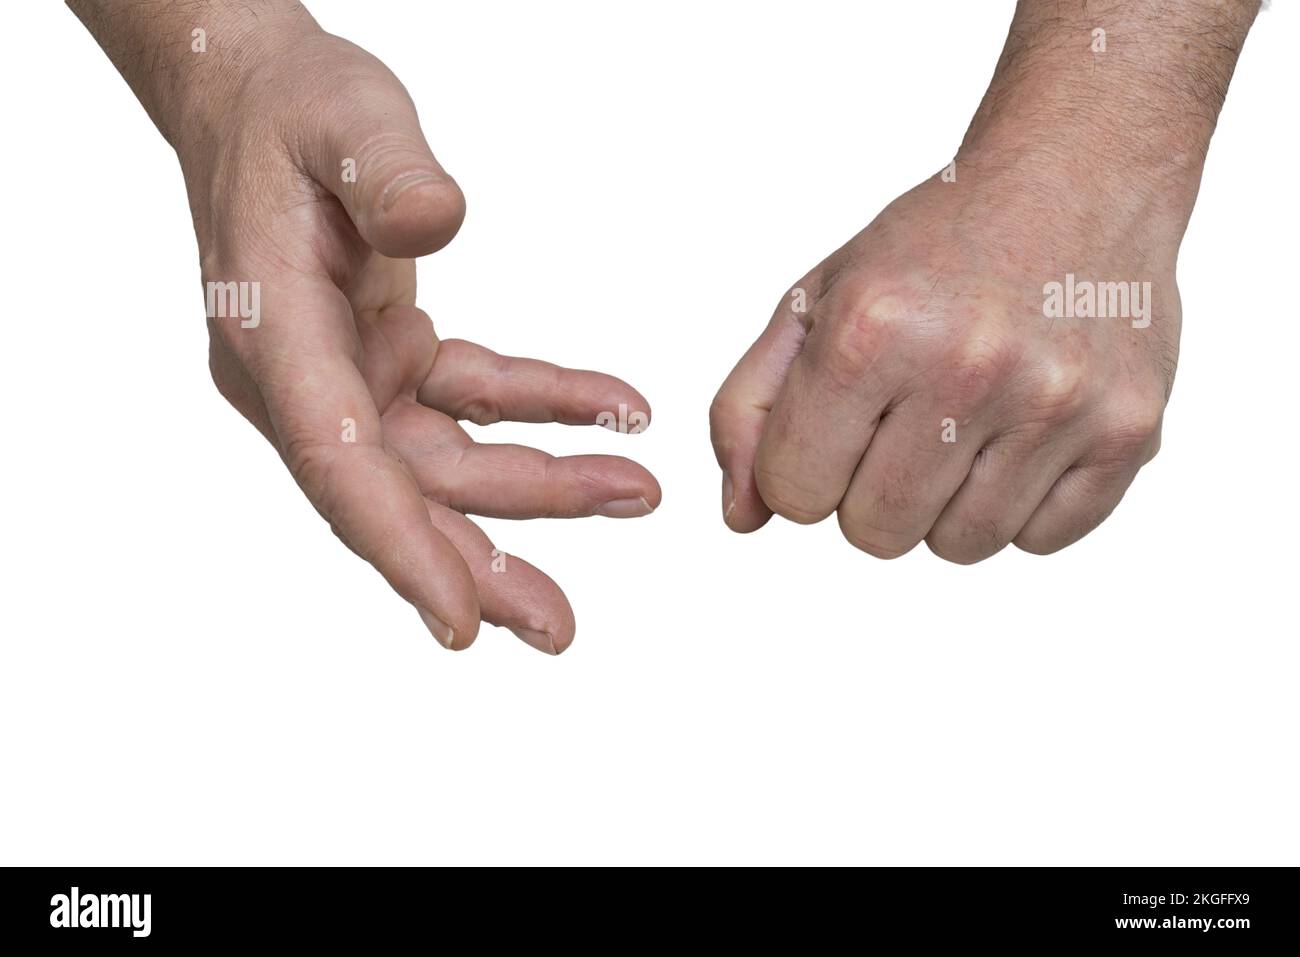 the gesture of a man's hands during an argument on a tgransparent background Stock Photo